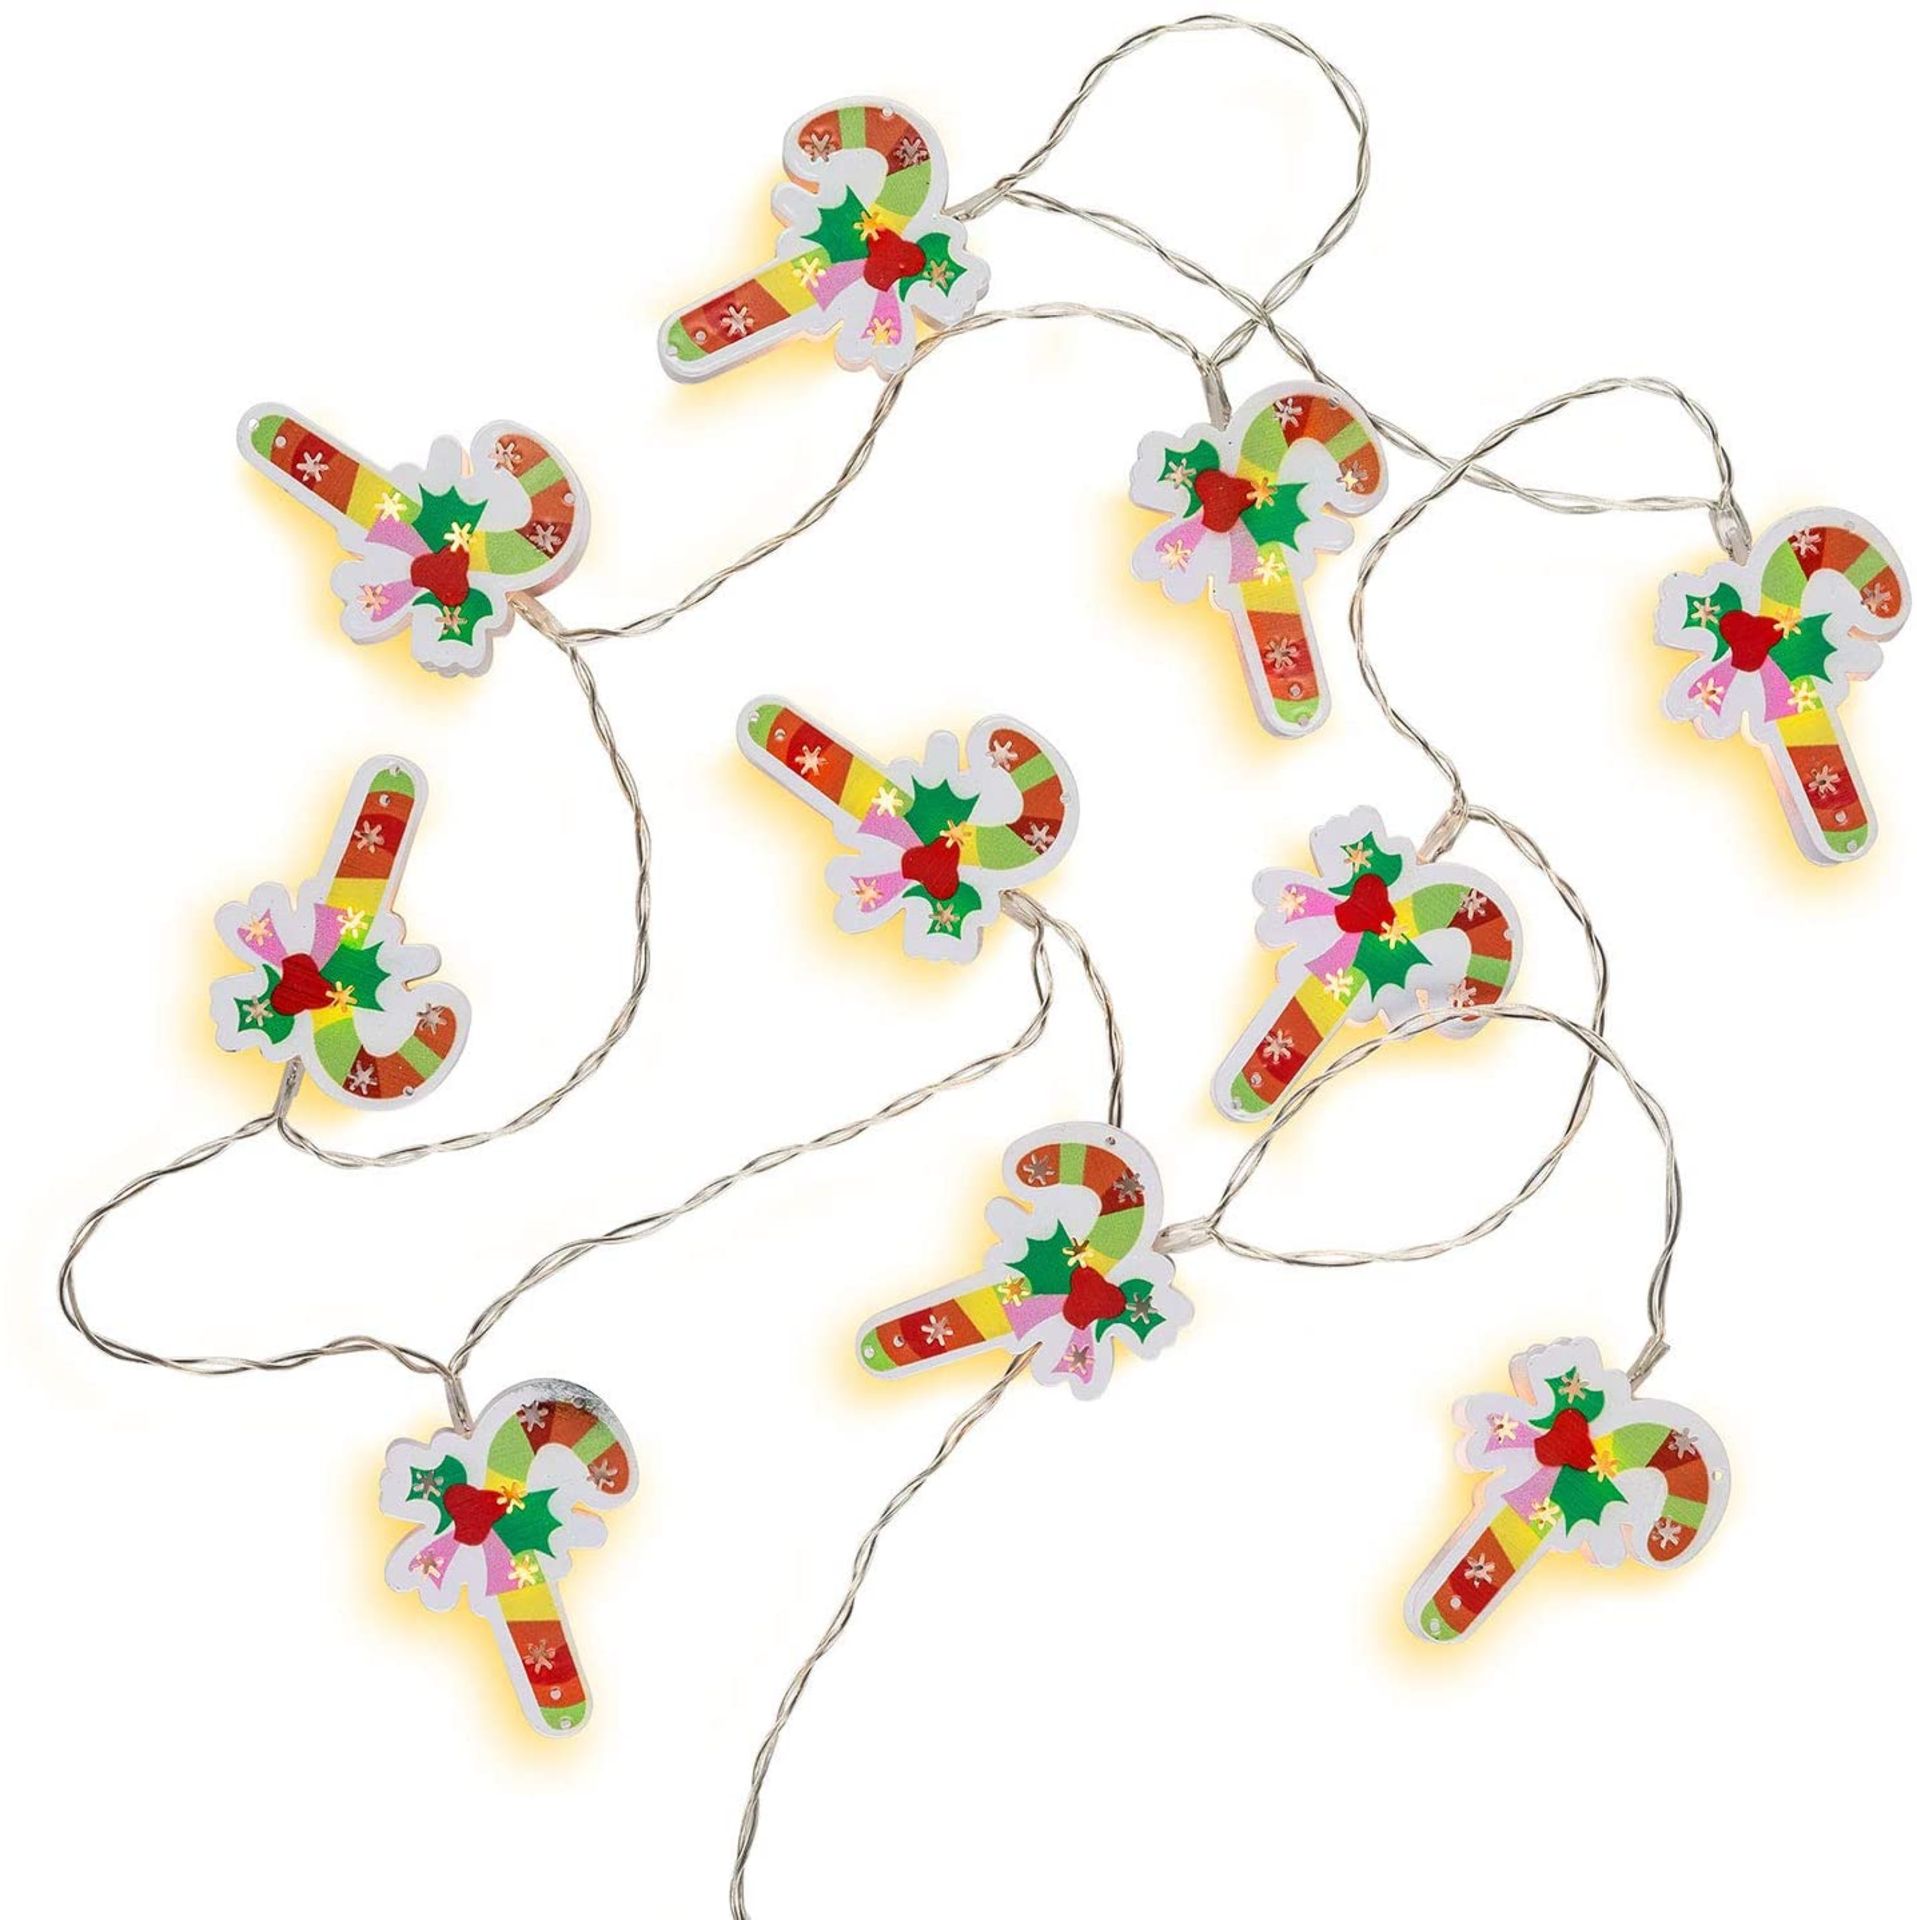 10 x Led Christmas Light Strings - Candy Canes - Image 4 of 5